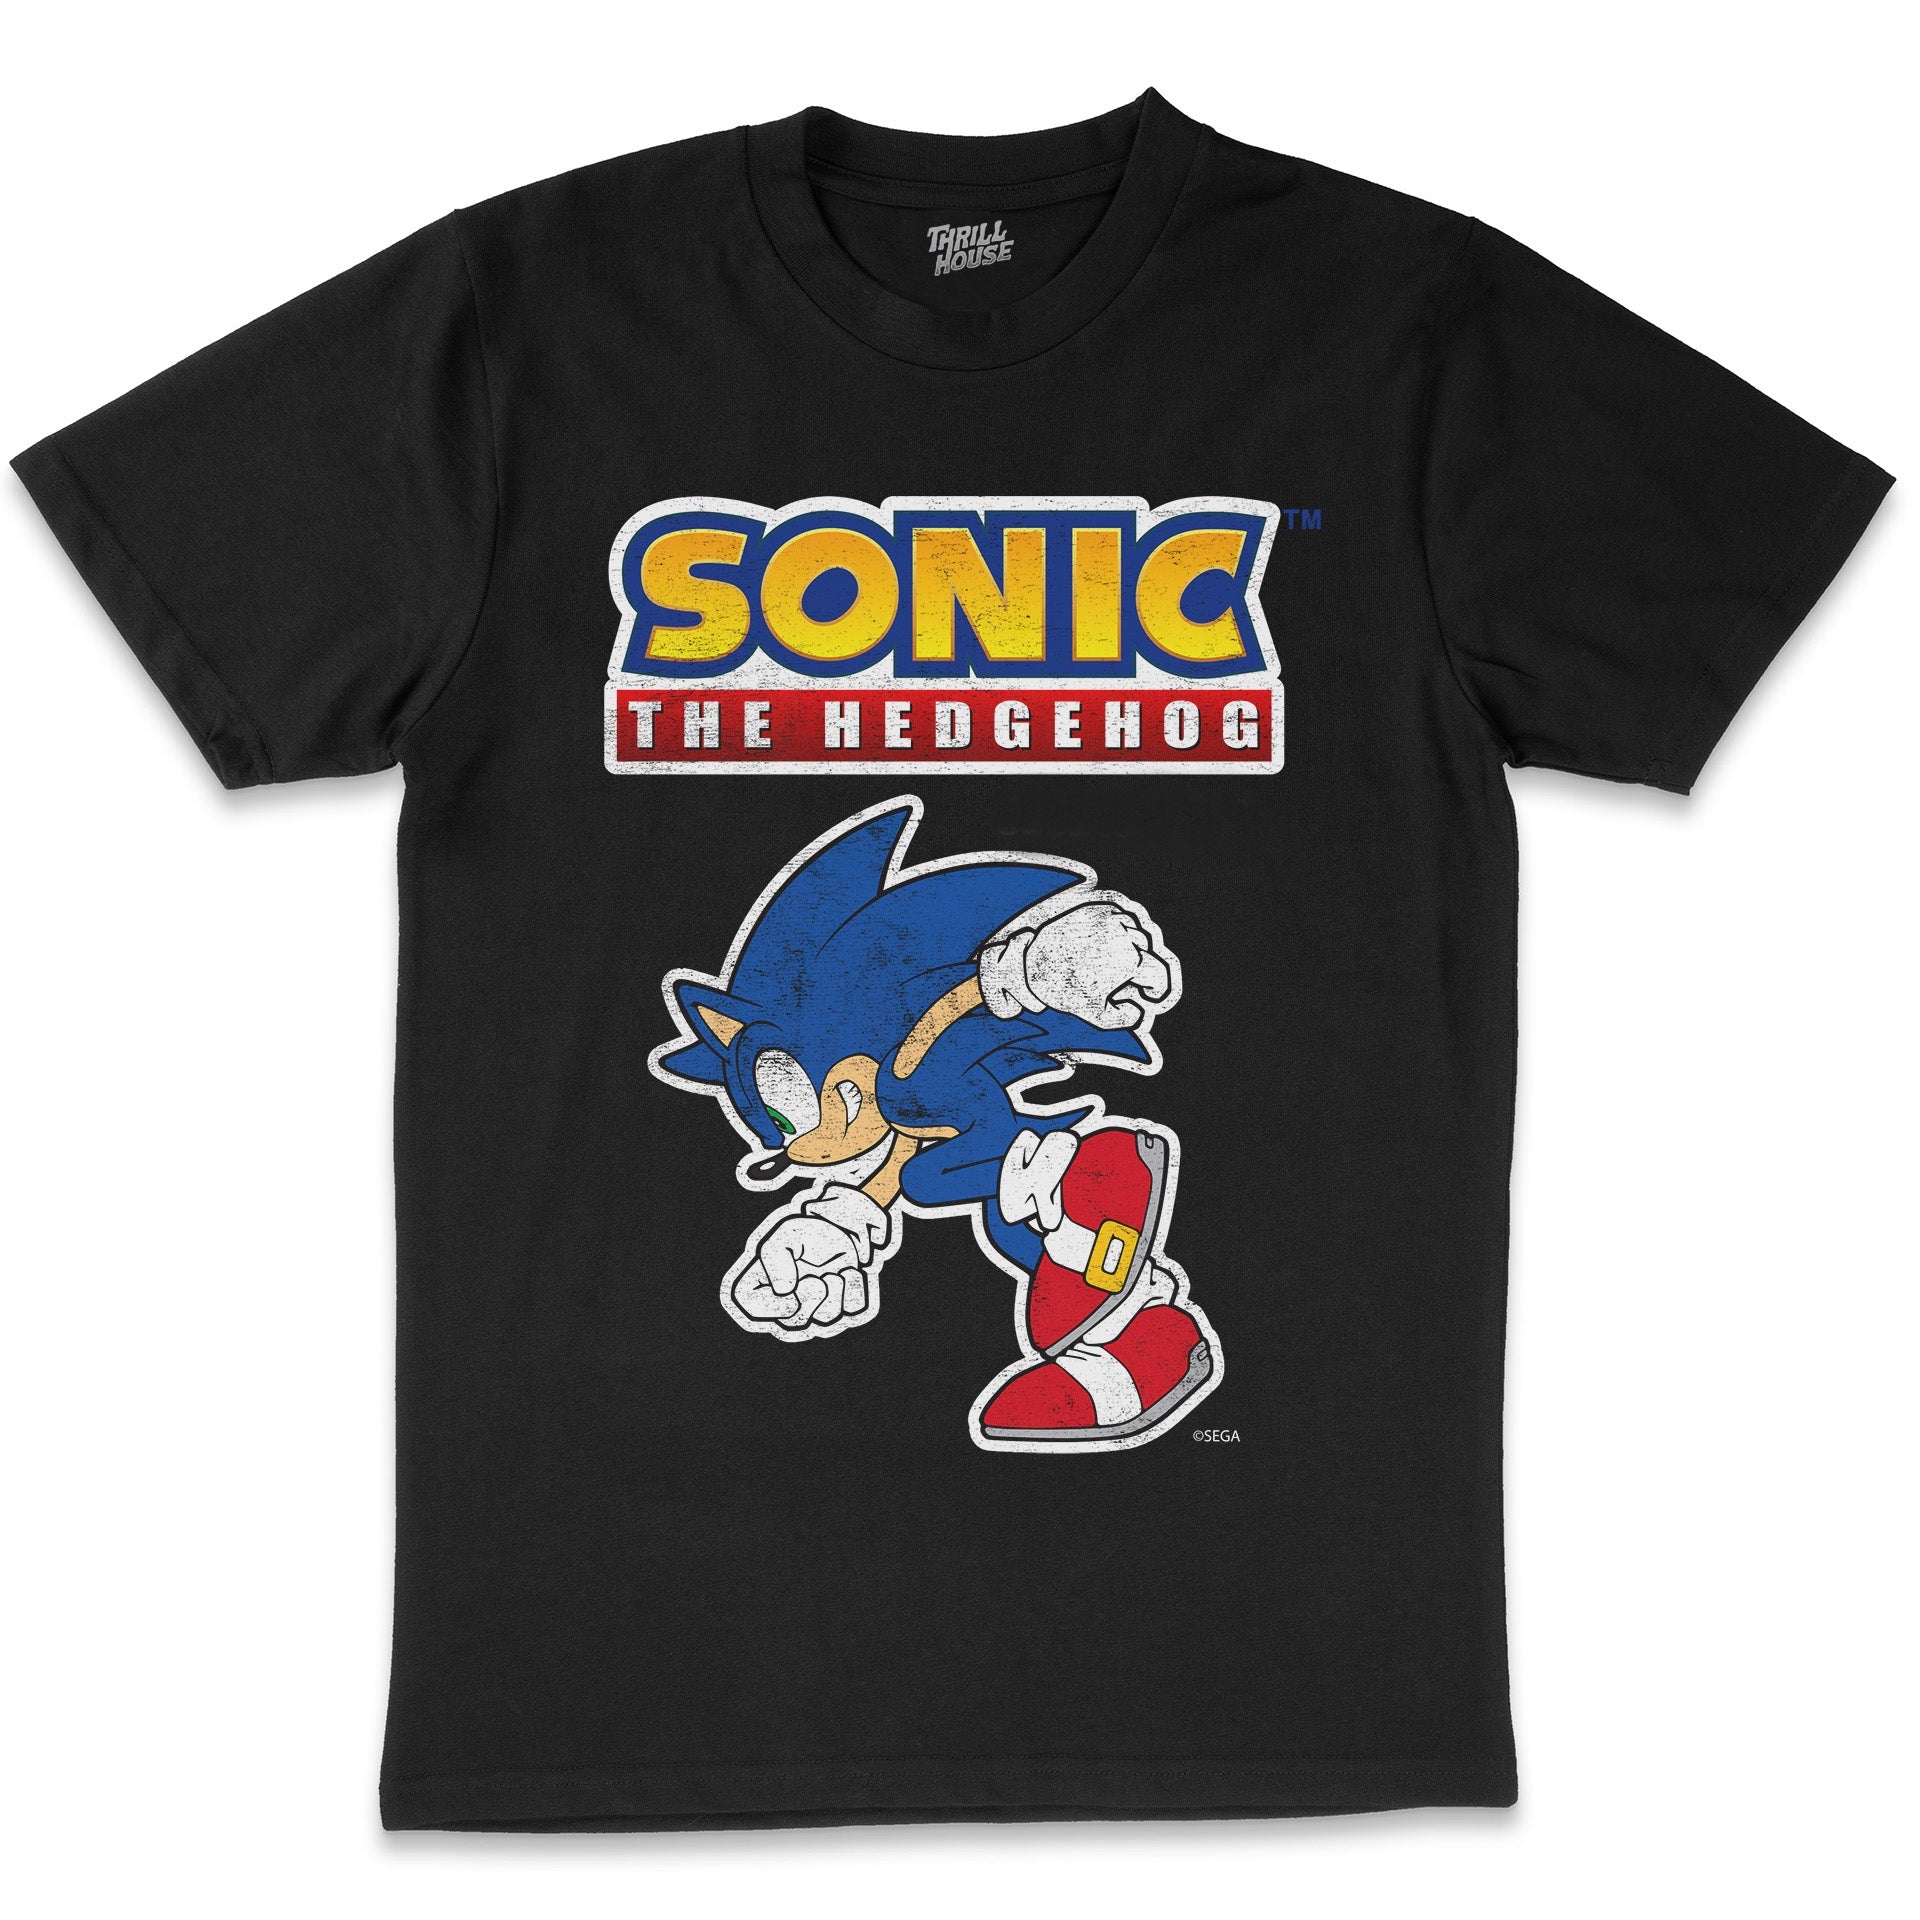 Sonic The Hedgehog Always on the Run 90s Video Game Cartridge Console Officially Licensed SEGA T-Shirt